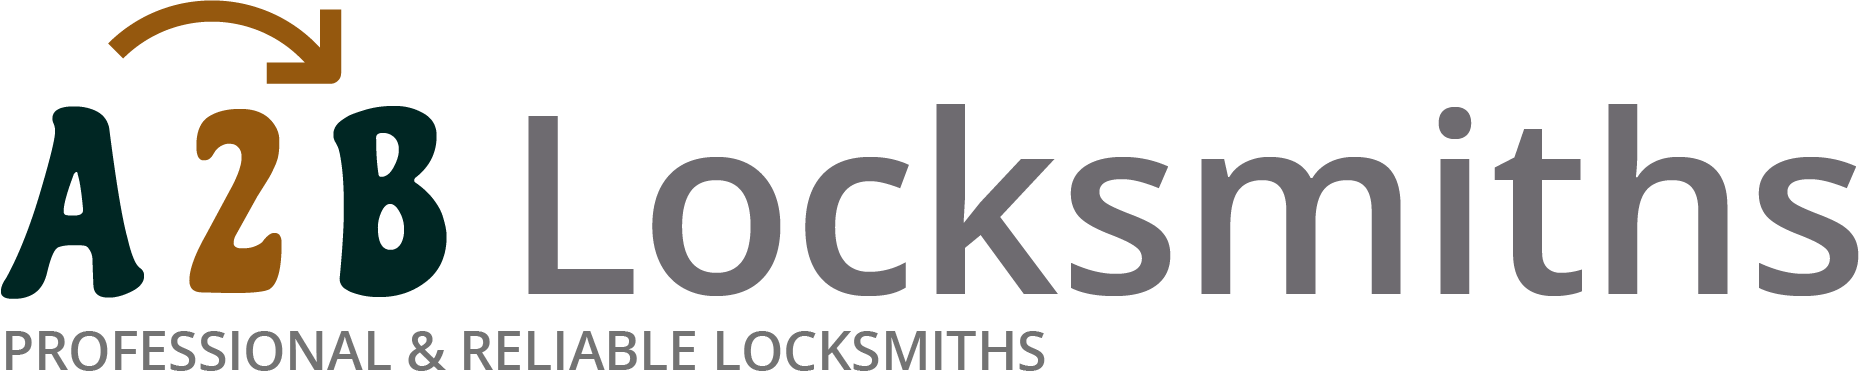 If you are locked out of house in Stoke Newington, our 24/7 local emergency locksmith services can help you.